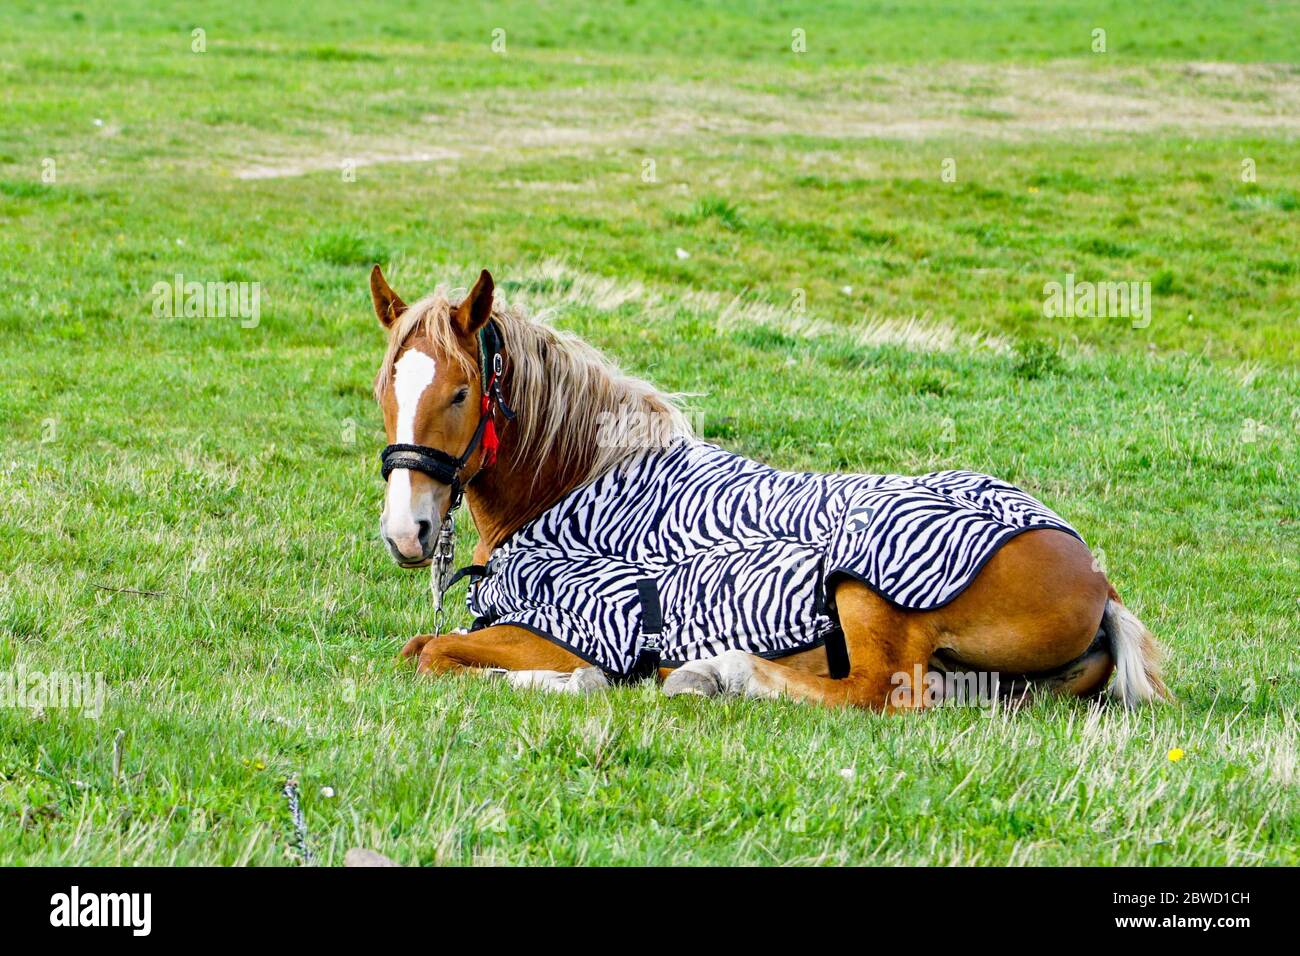 Horse Lying Down Sleeping High Resolution Stock Photography And Images Alamy,Maple Trees In Fall